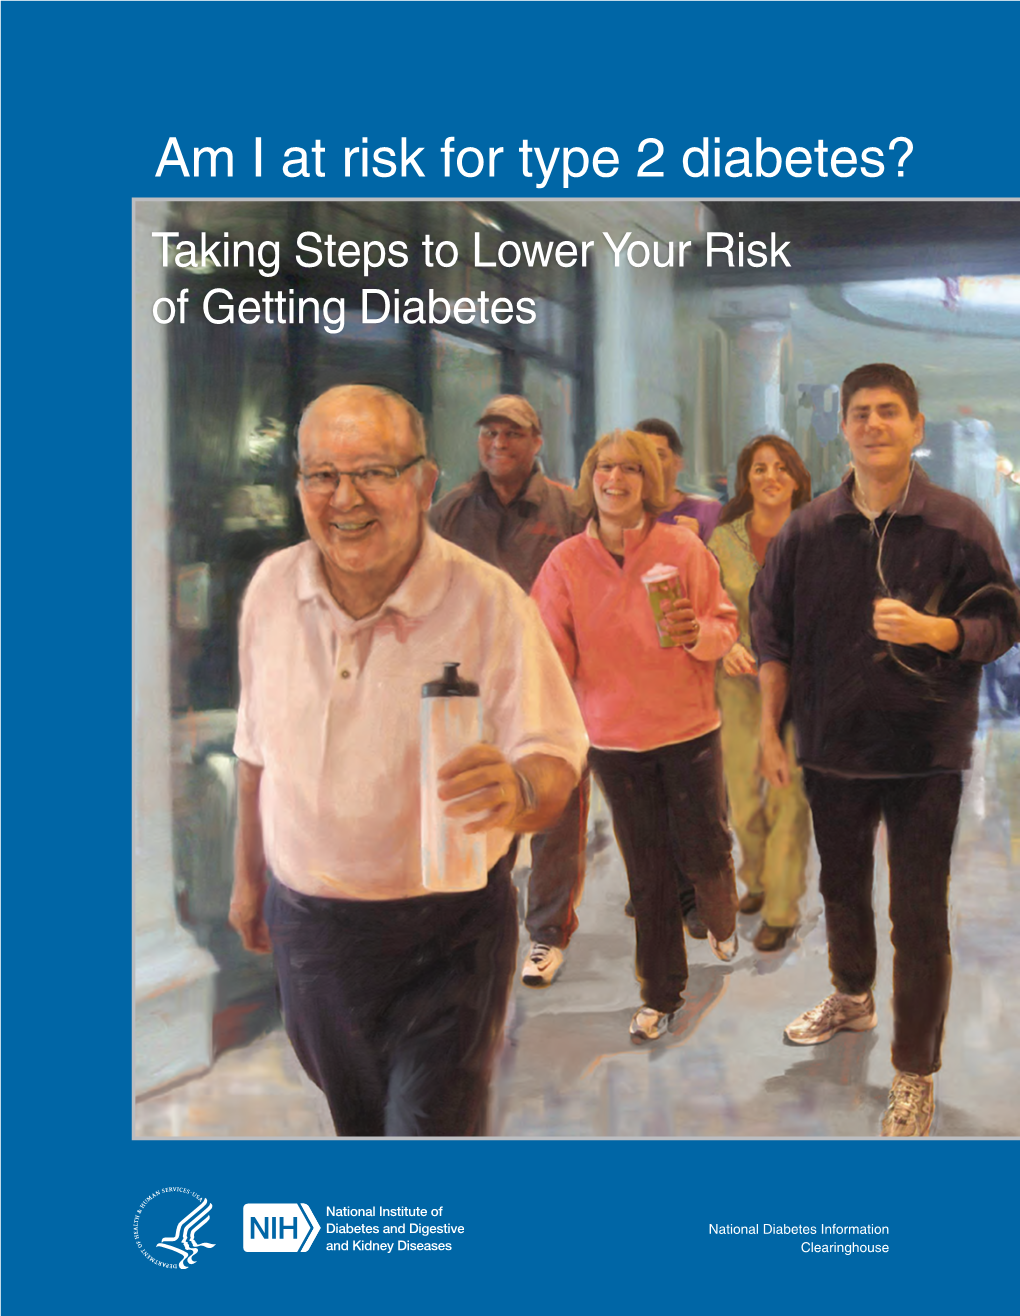 Am I at Risk for Type 2 Diabetes? Taking Steps to Lower Your Risk of Getting Diabetes